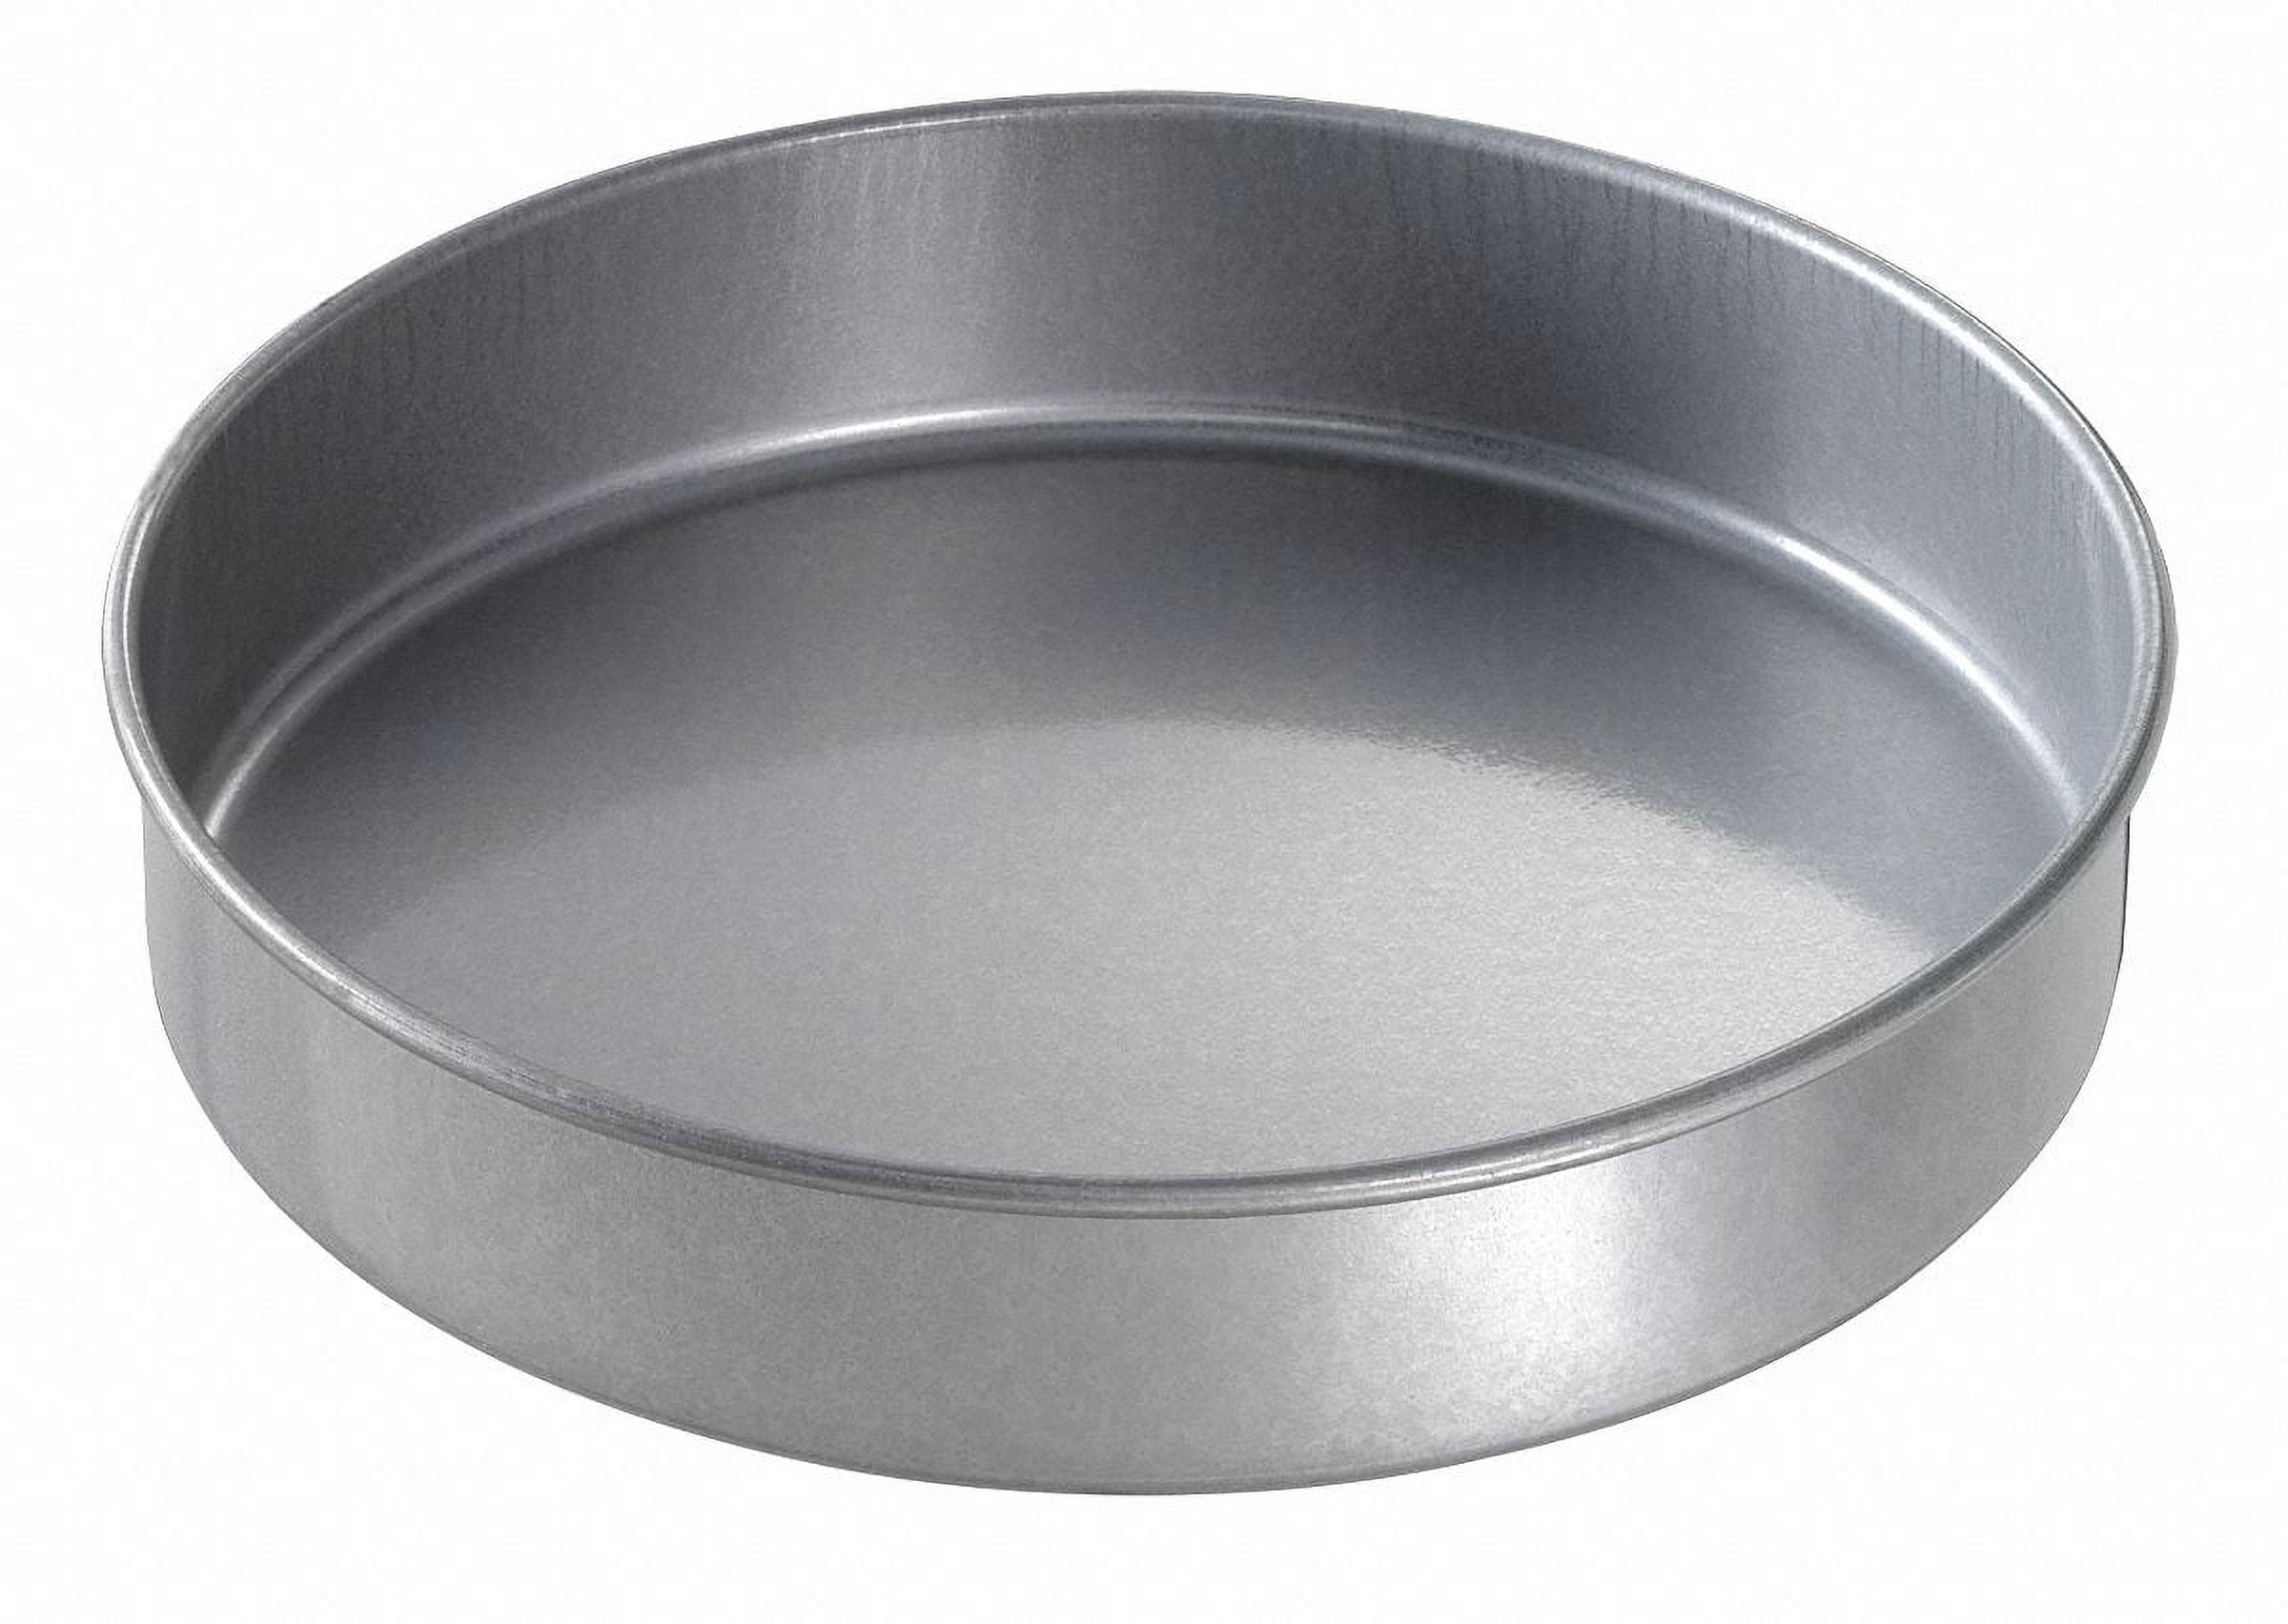 Chicago Metallic 59628 8-Inch Commercial II Non-Stick Round Cake Pan. Make  traditional round cakes, layer cakes, , or savory dishes like macaroni and